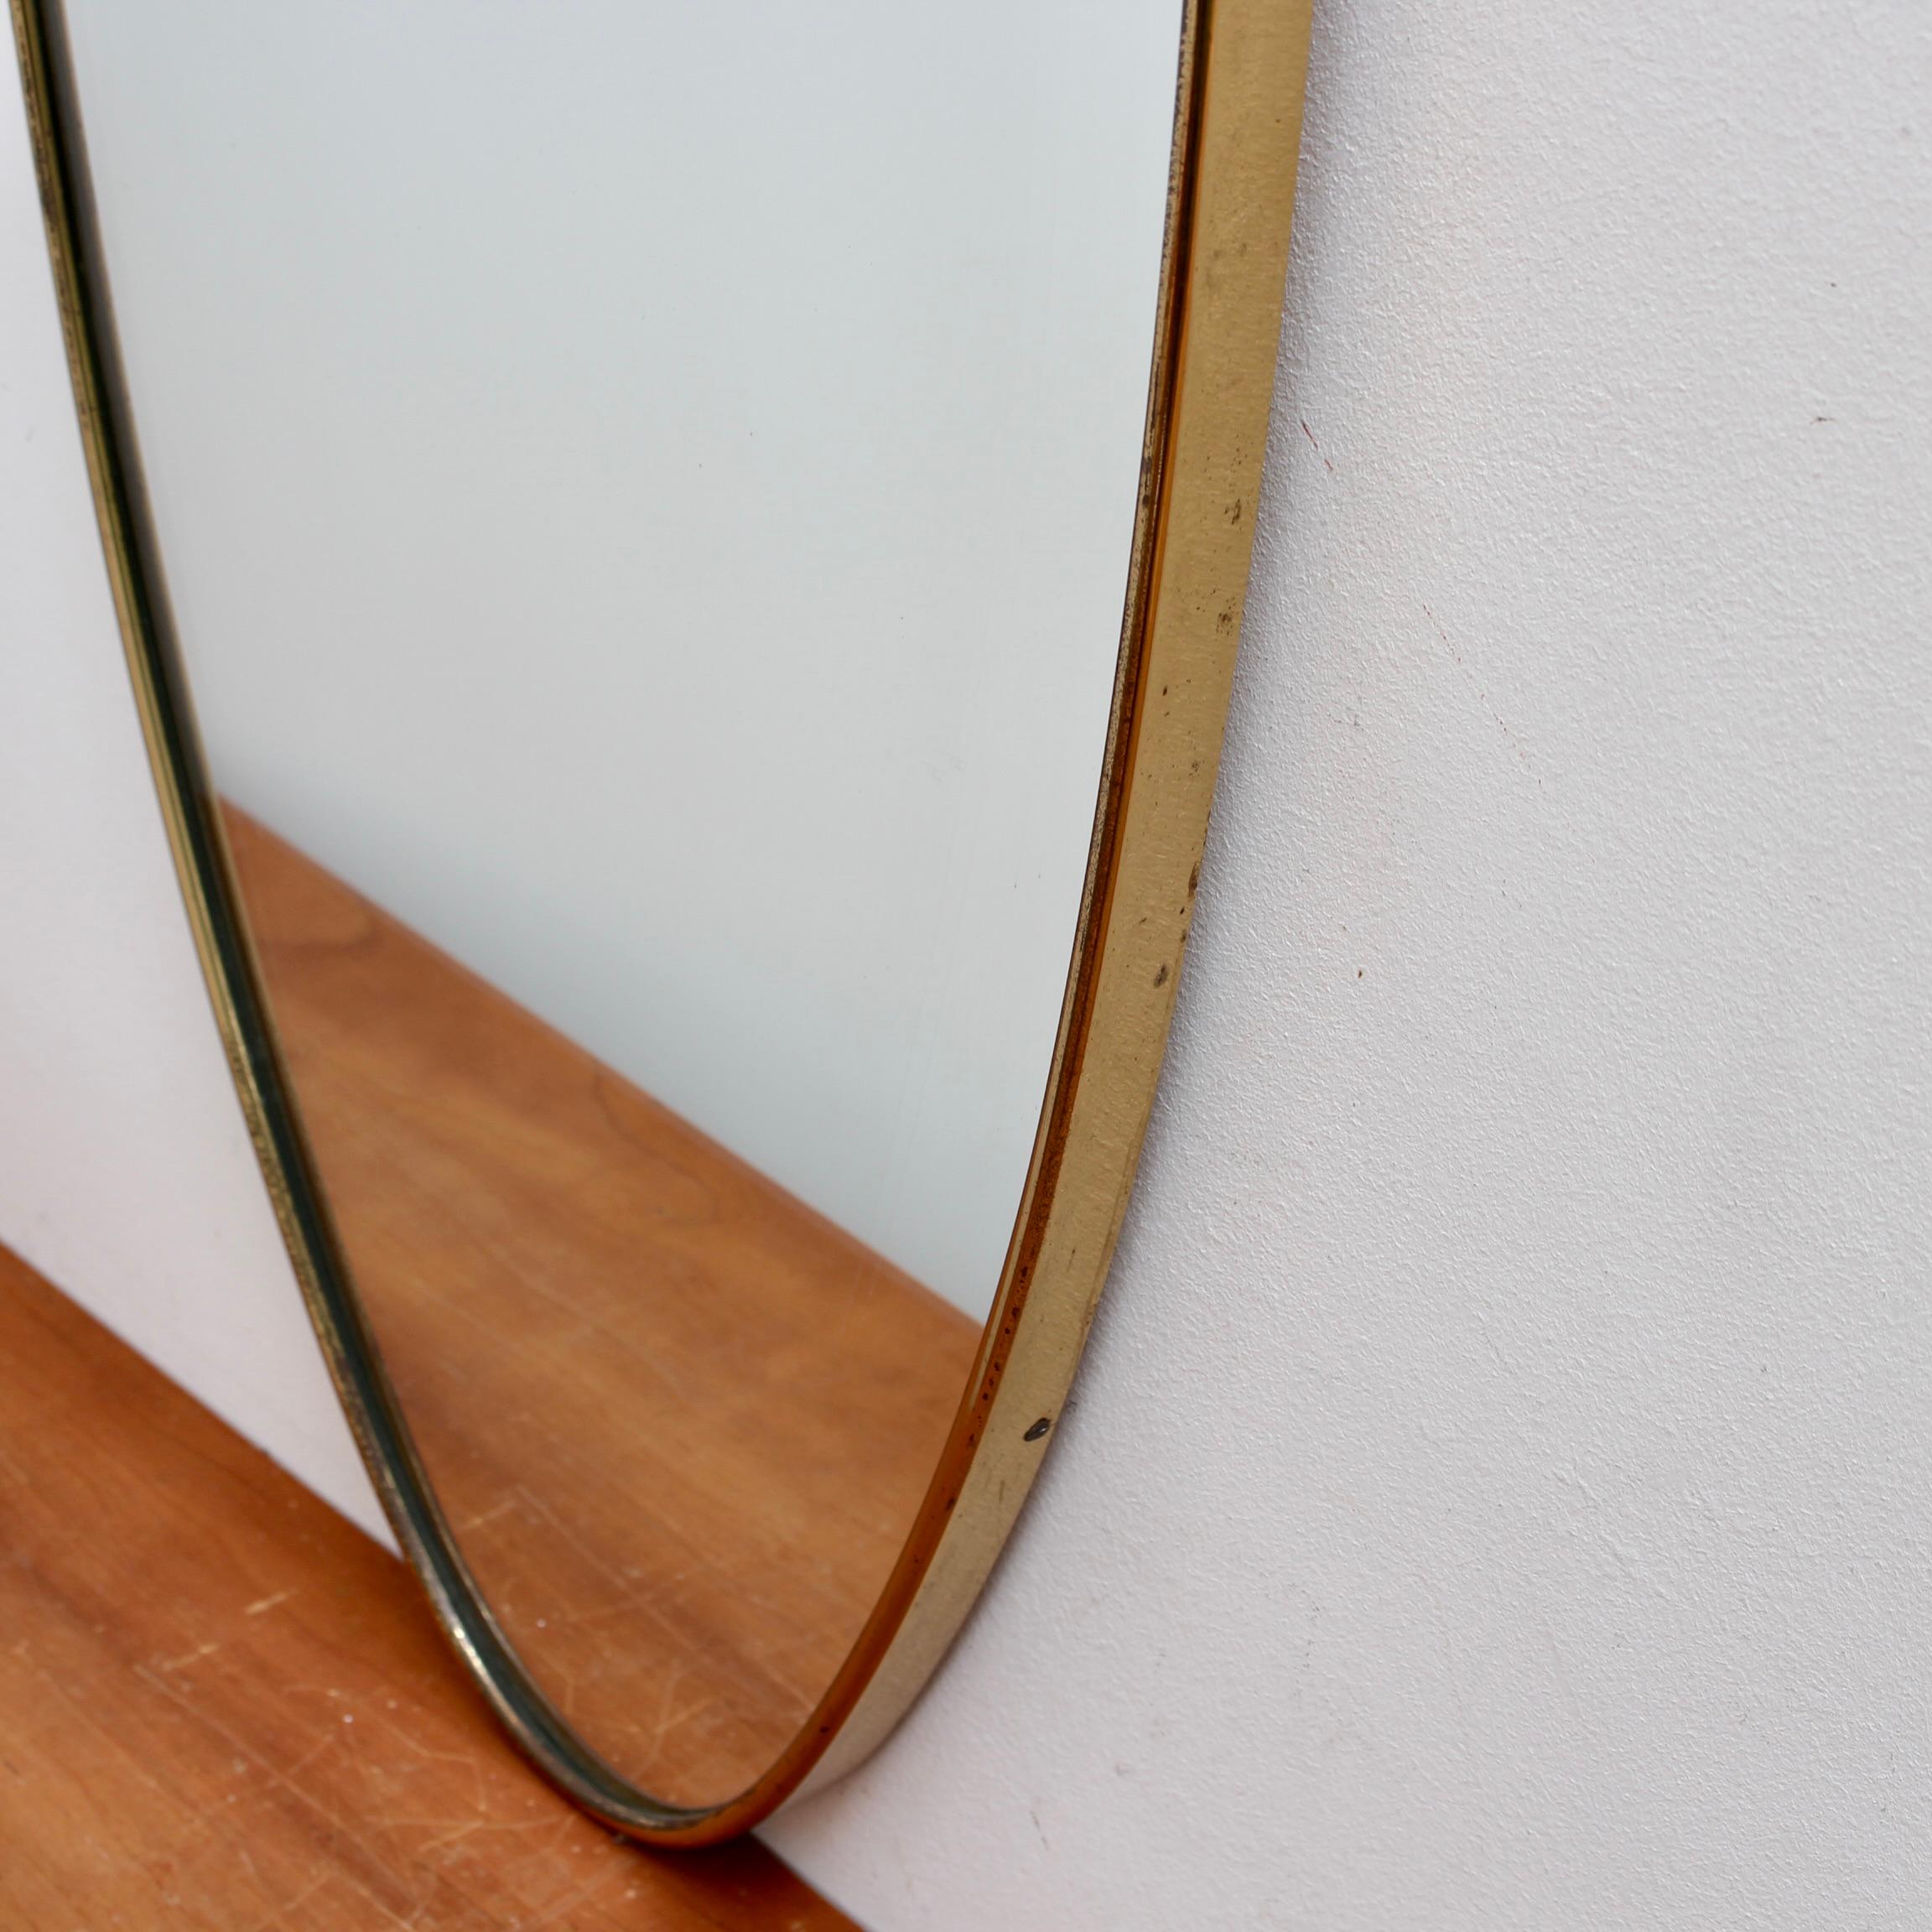 Vintage Italian Wall Mirror with Brass Frame (circa 1960s) - Large For Sale 7